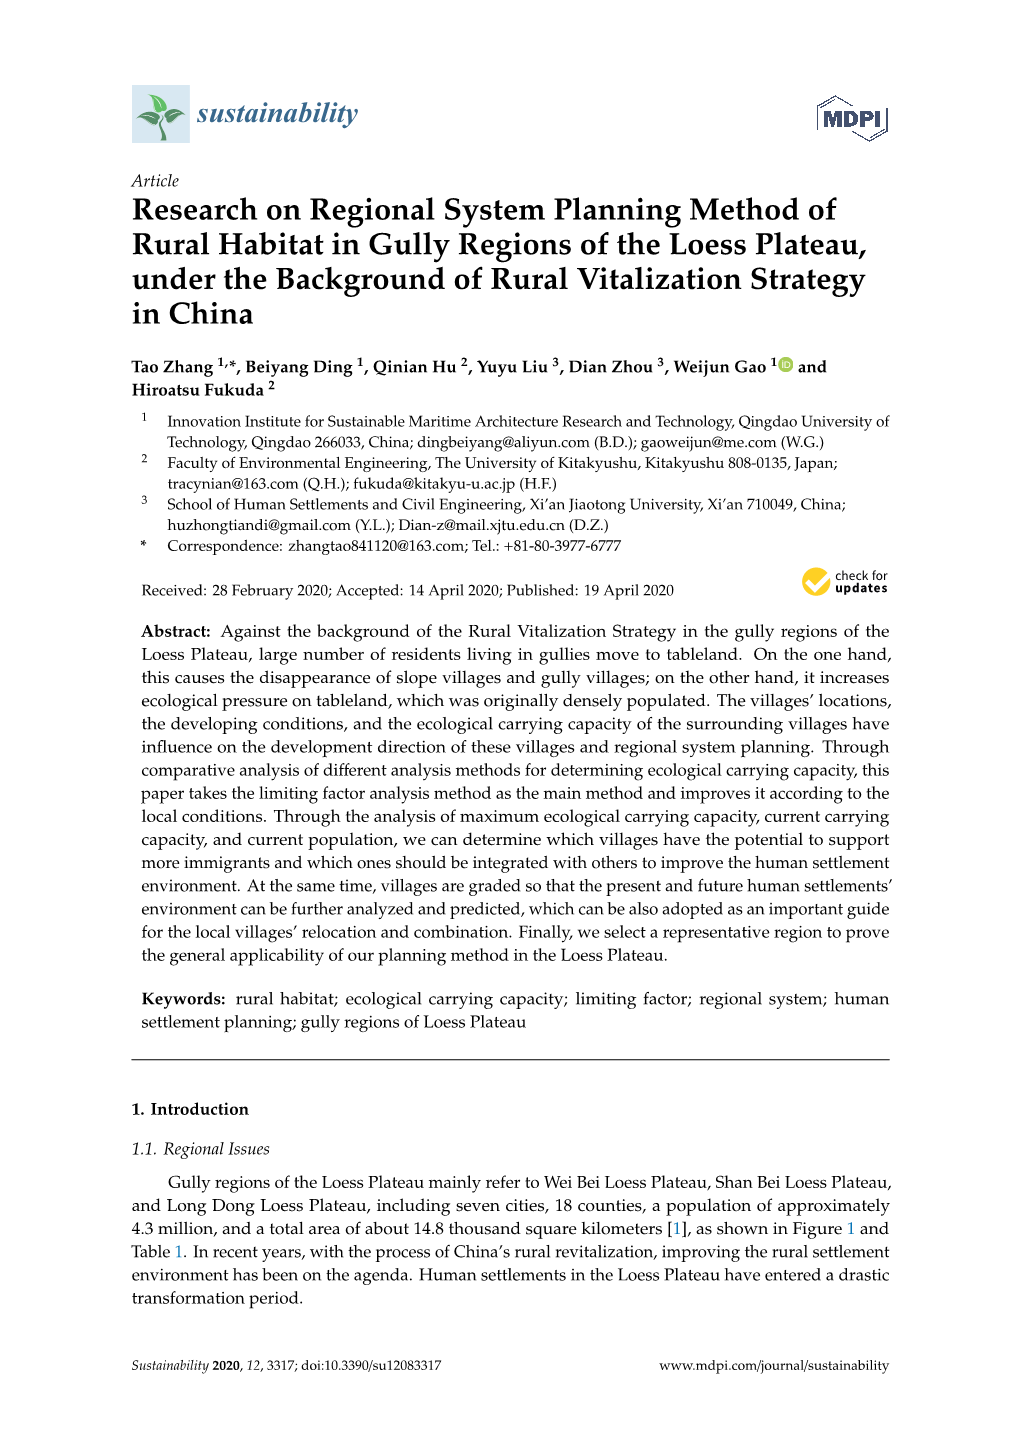 Research on Regional System Planning Method of Rural Habitat in Gully Regions of the Loess Plateau, Under the Background of Rural Vitalization Strategy in China